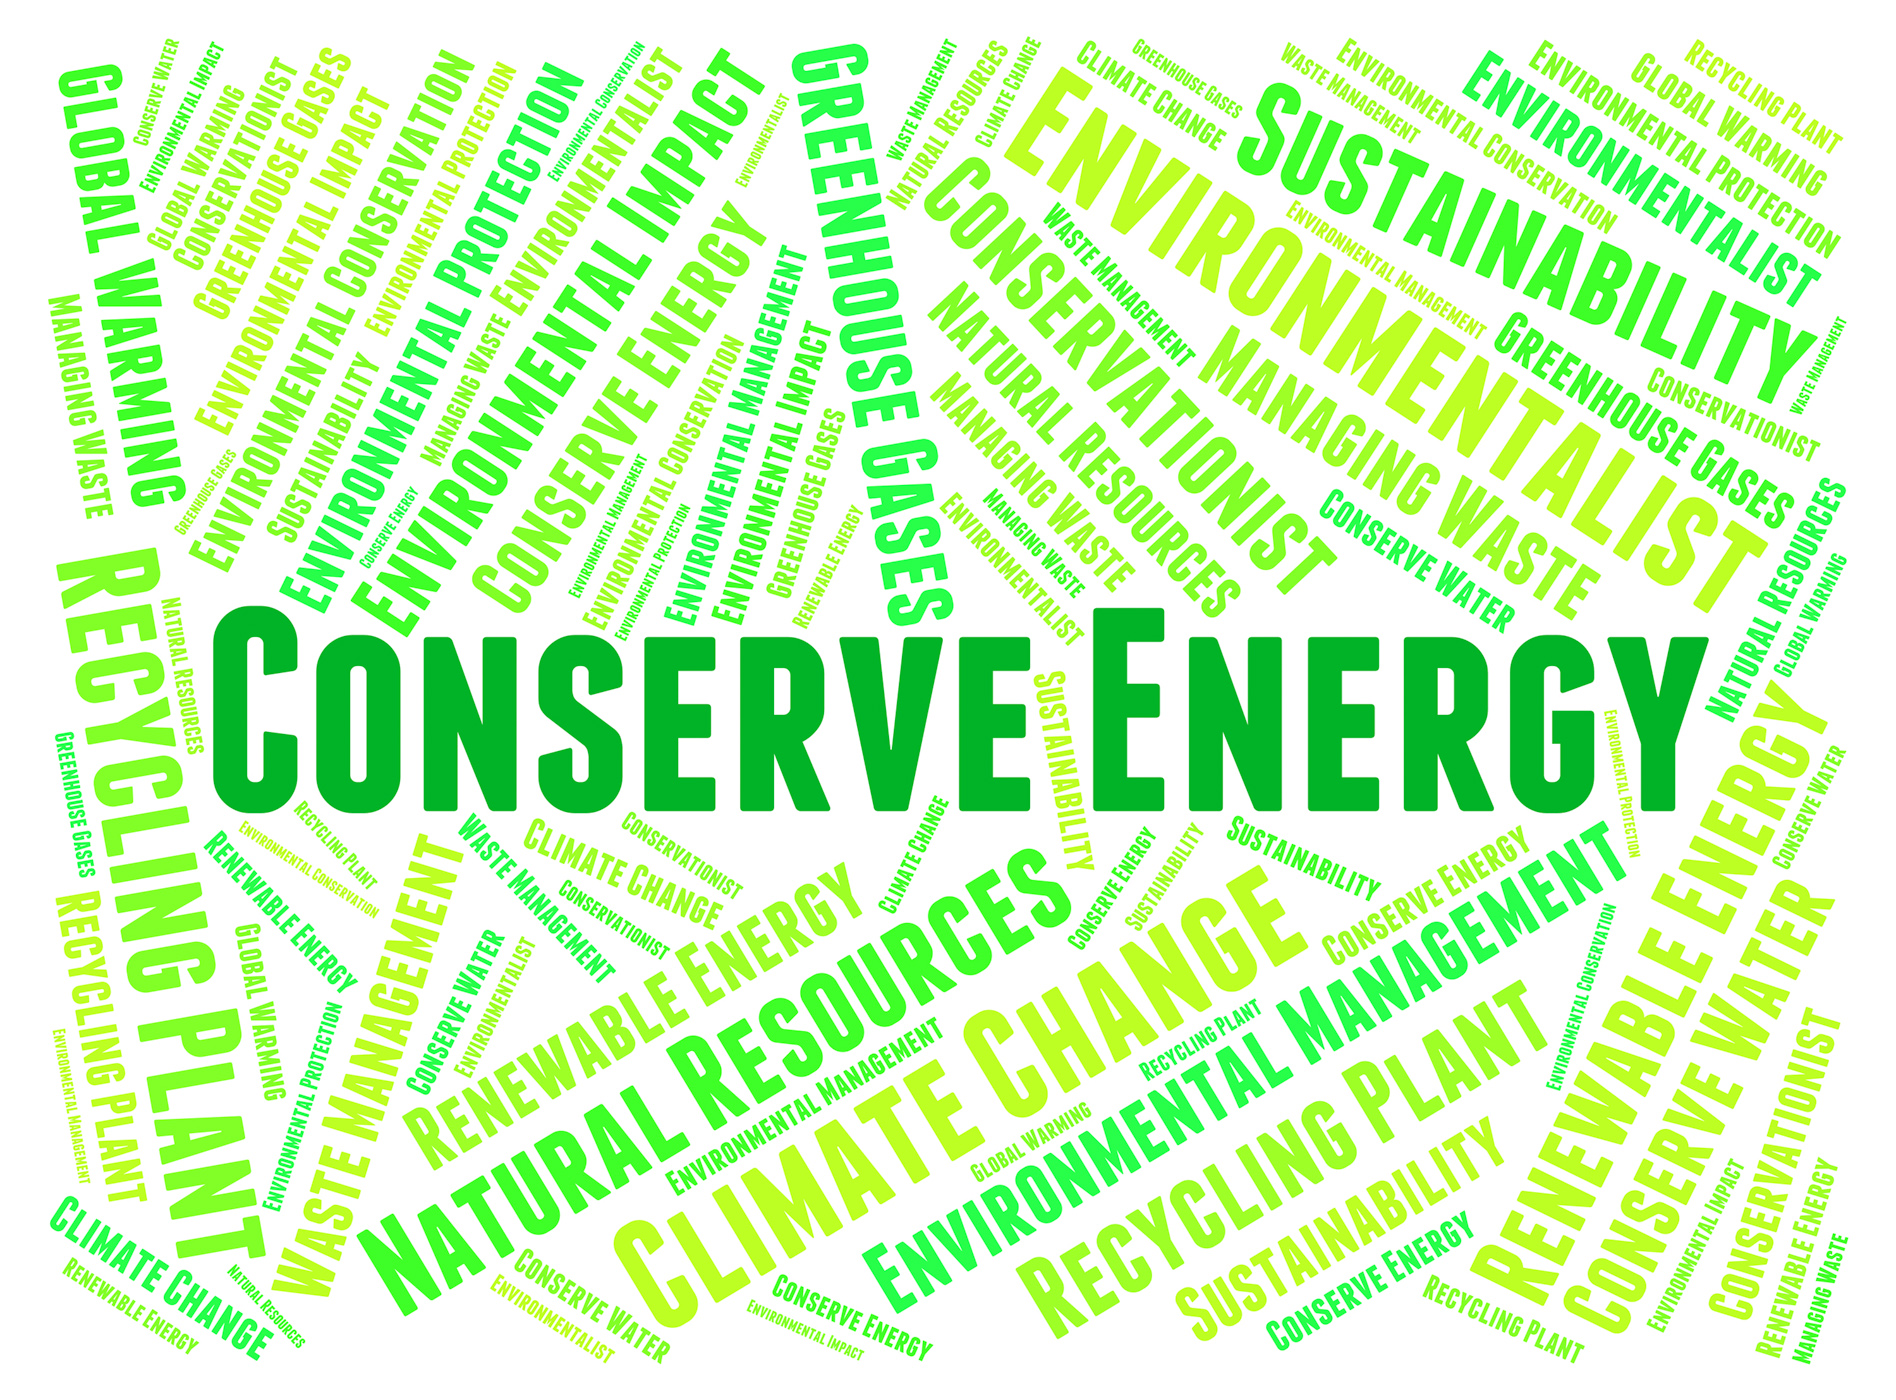 Conserve energy represents power save and preserves photo